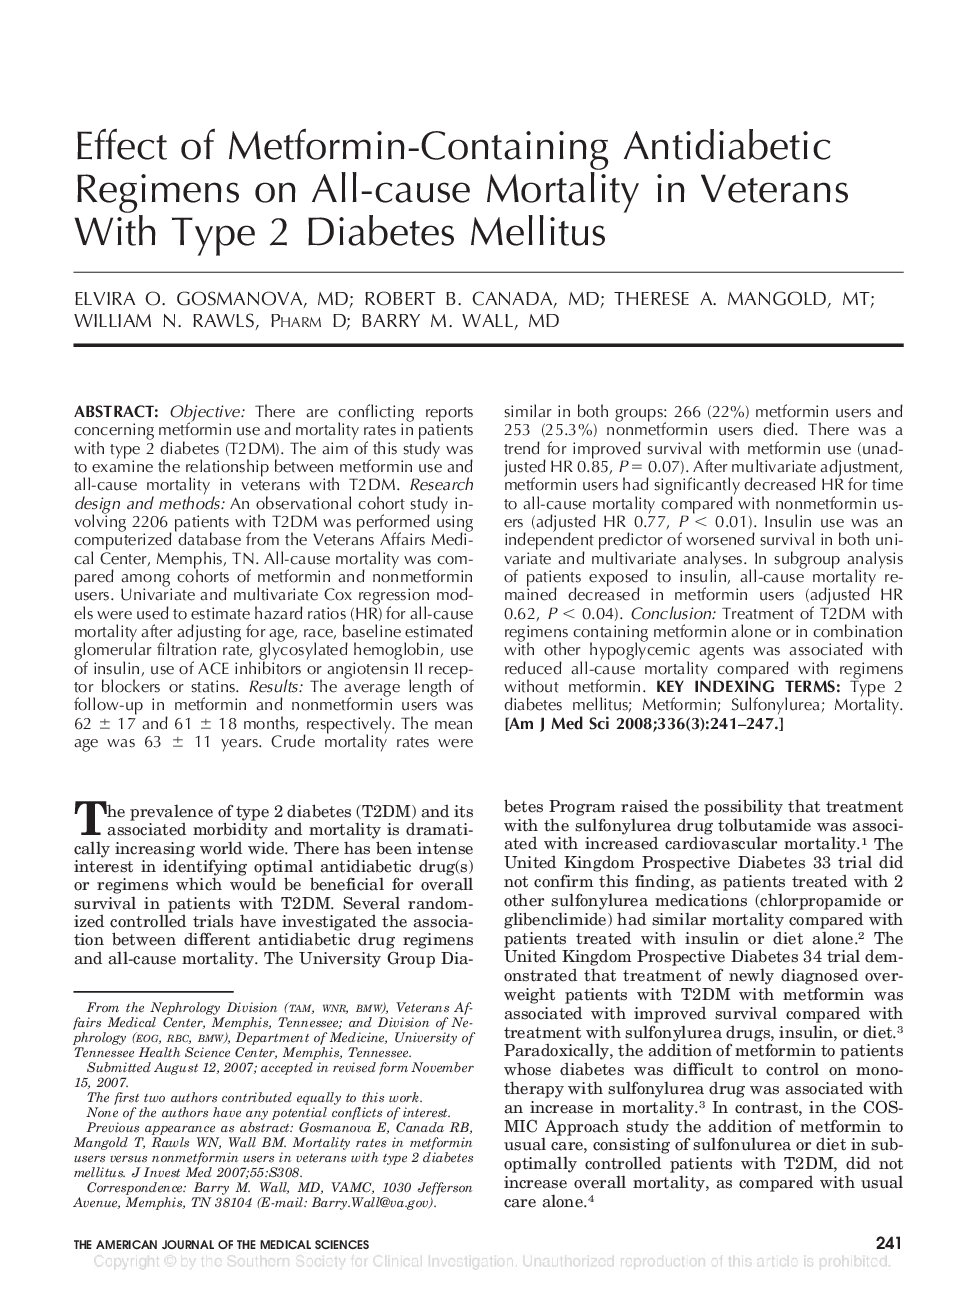 Effect of Metformin-Containing Antidiabetic Regimens on All-cause Mortality in Veterans With Type 2 Diabetes Mellitus